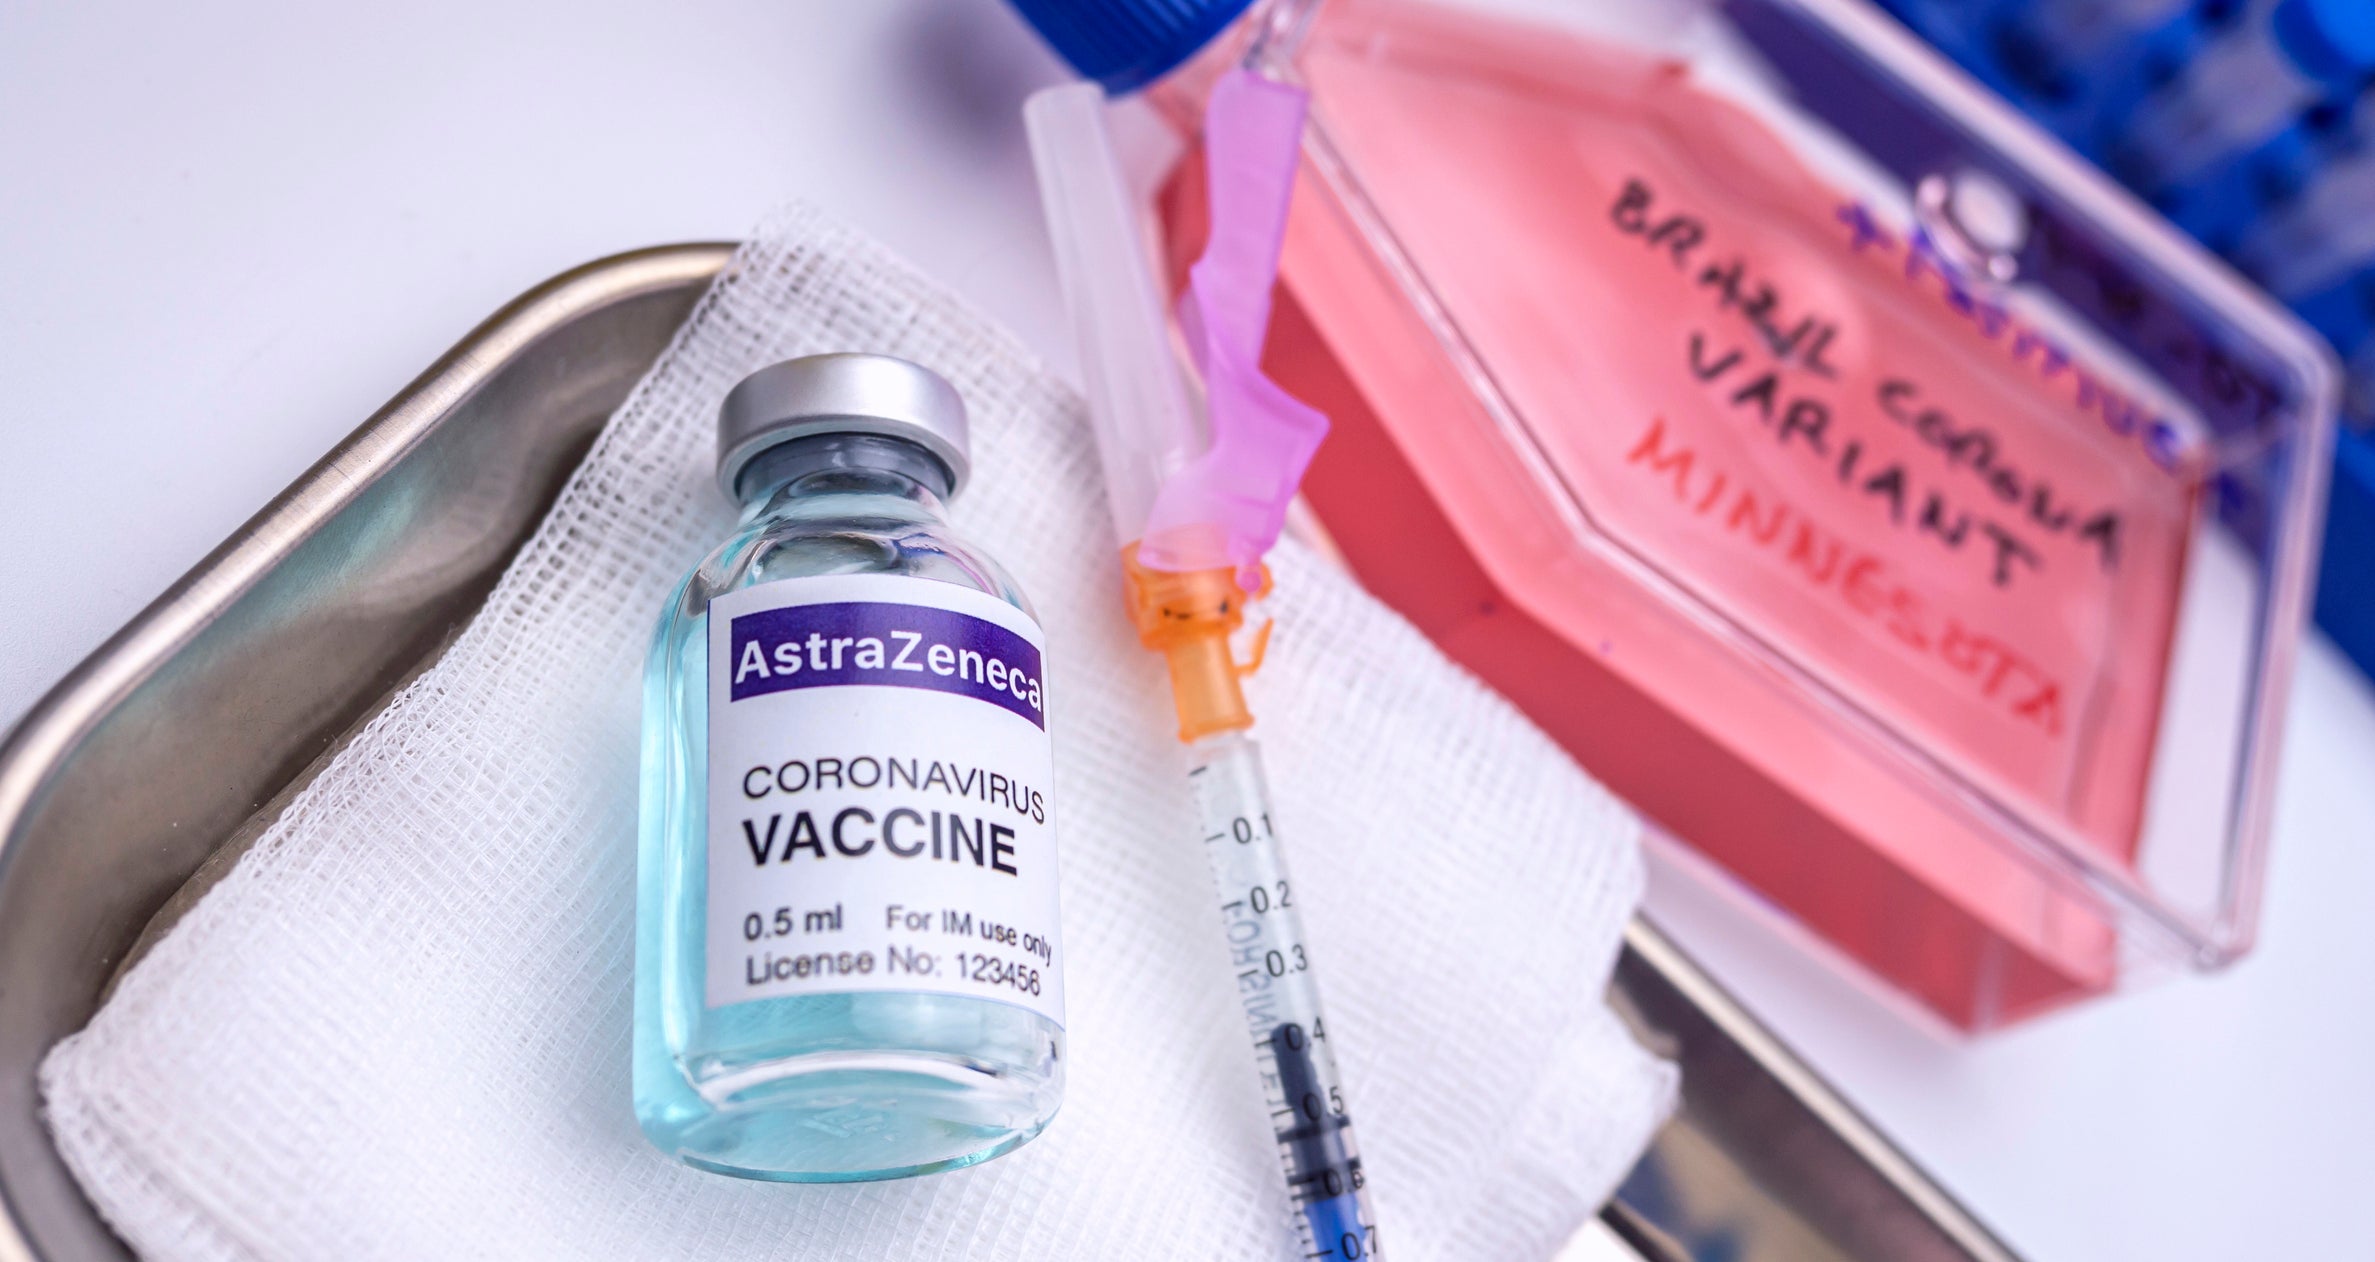 AstraZeneca/Oxford’s Covid-19 vaccine could see increased global uptake after strong efficacy results